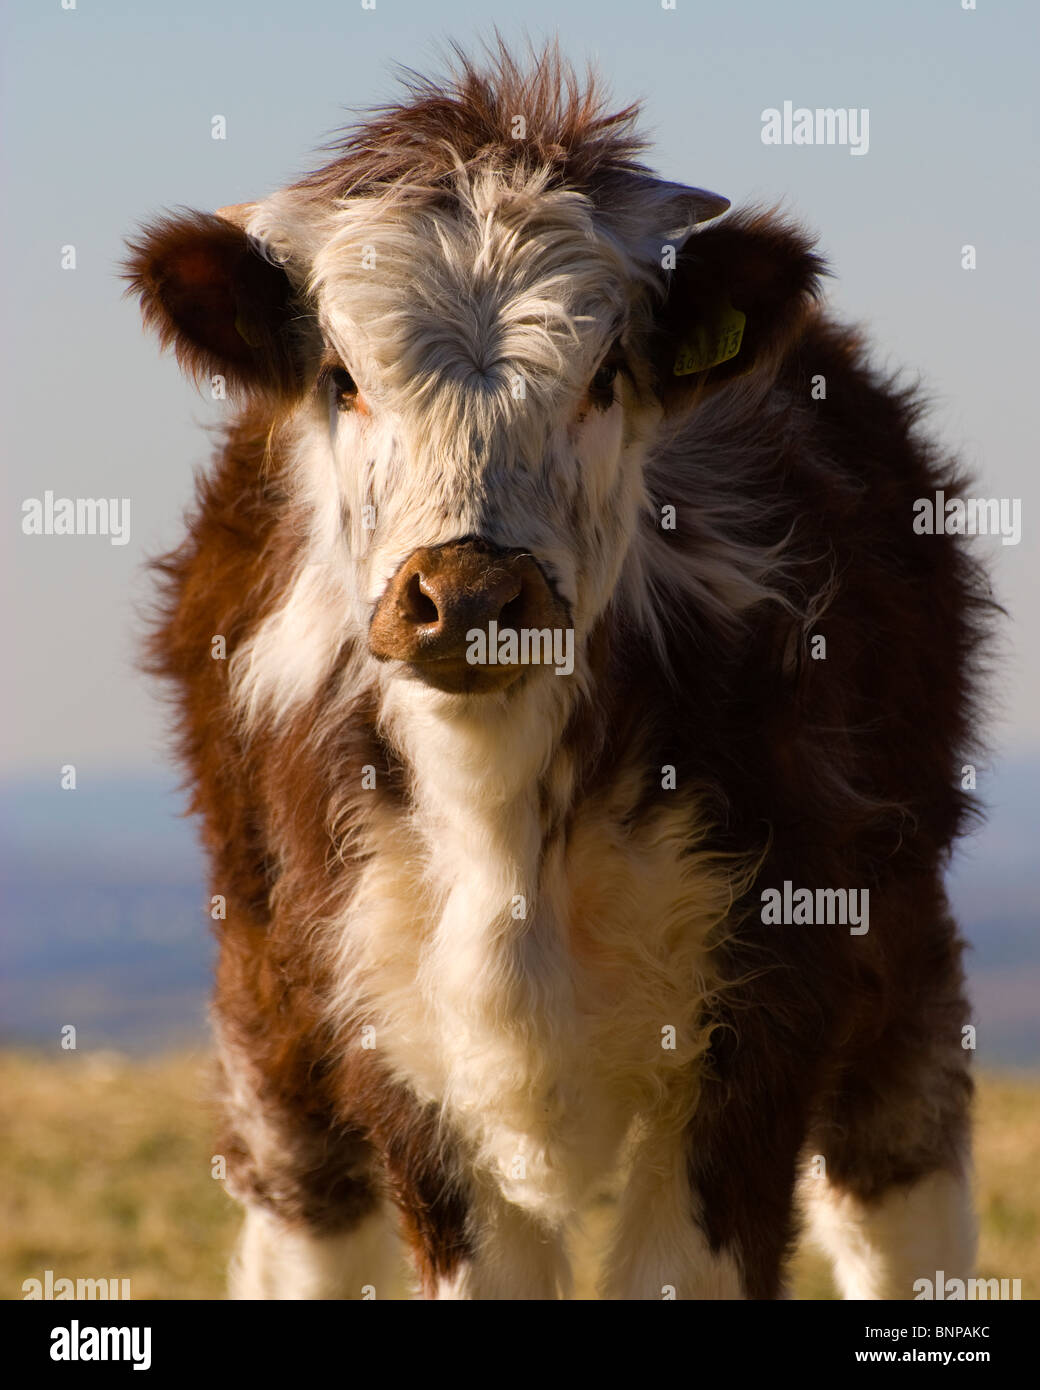 Short Long Horn Calf. Cute and Fluffy Baby Cow Stock Photo